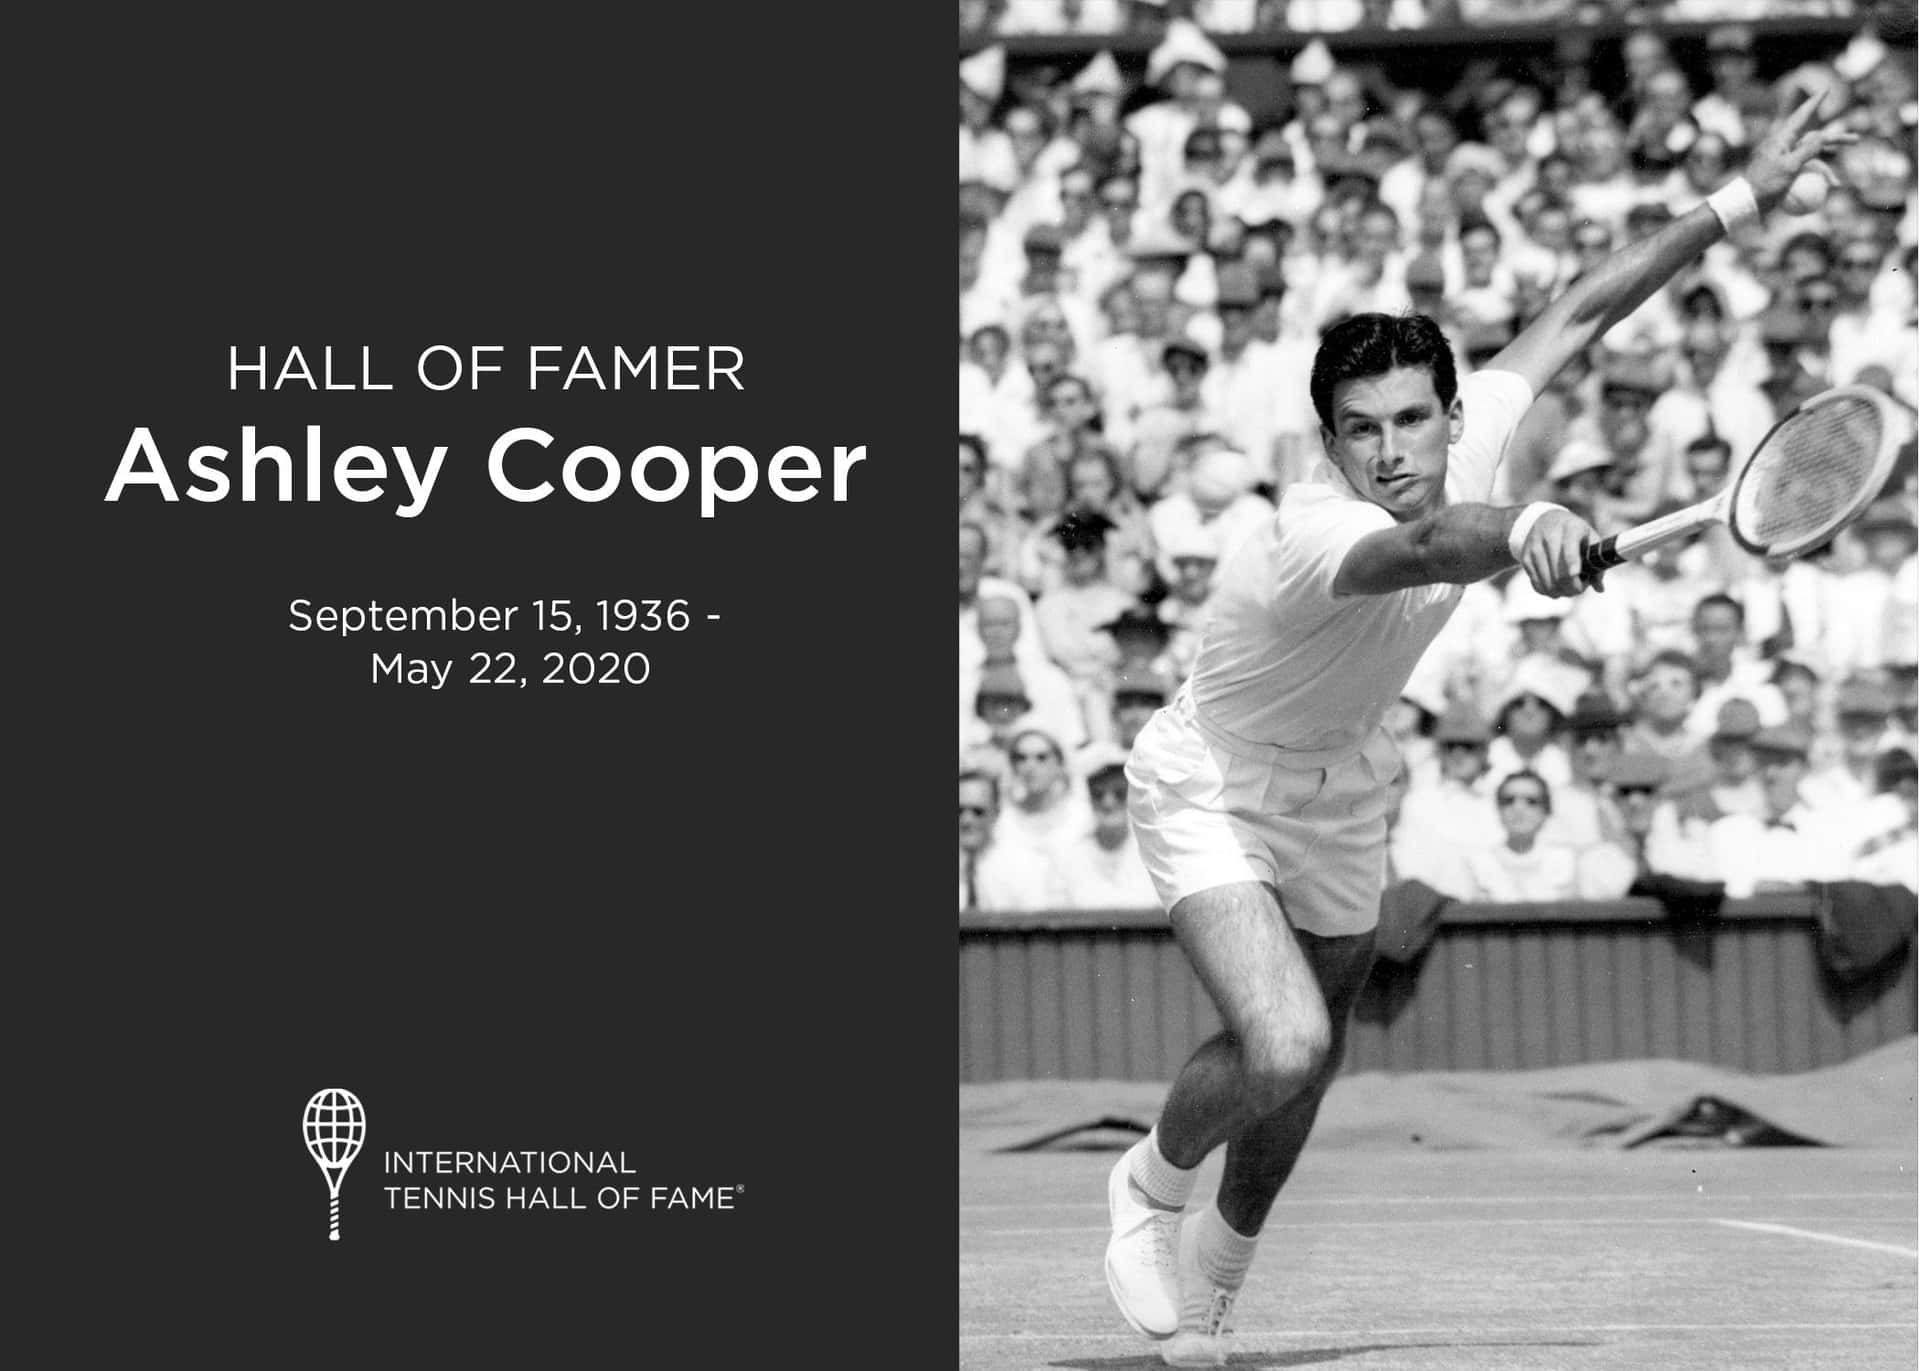 Caption: Ashley Cooper at the International Tennis Hall of Fame Wallpaper